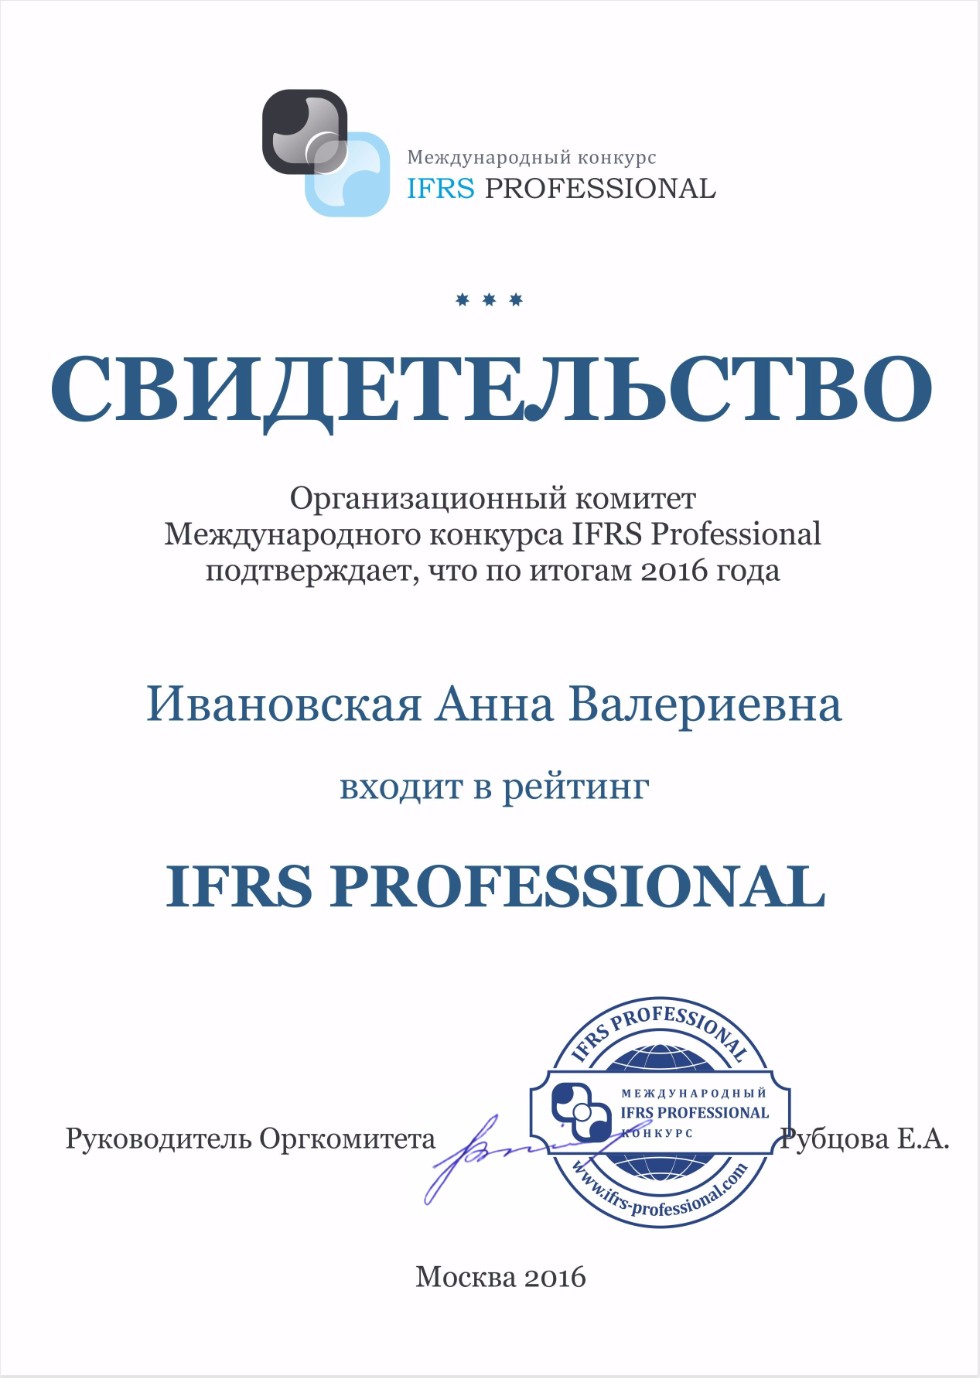  IFRS PROFESSIONAL ,IFRS Professional, ,   